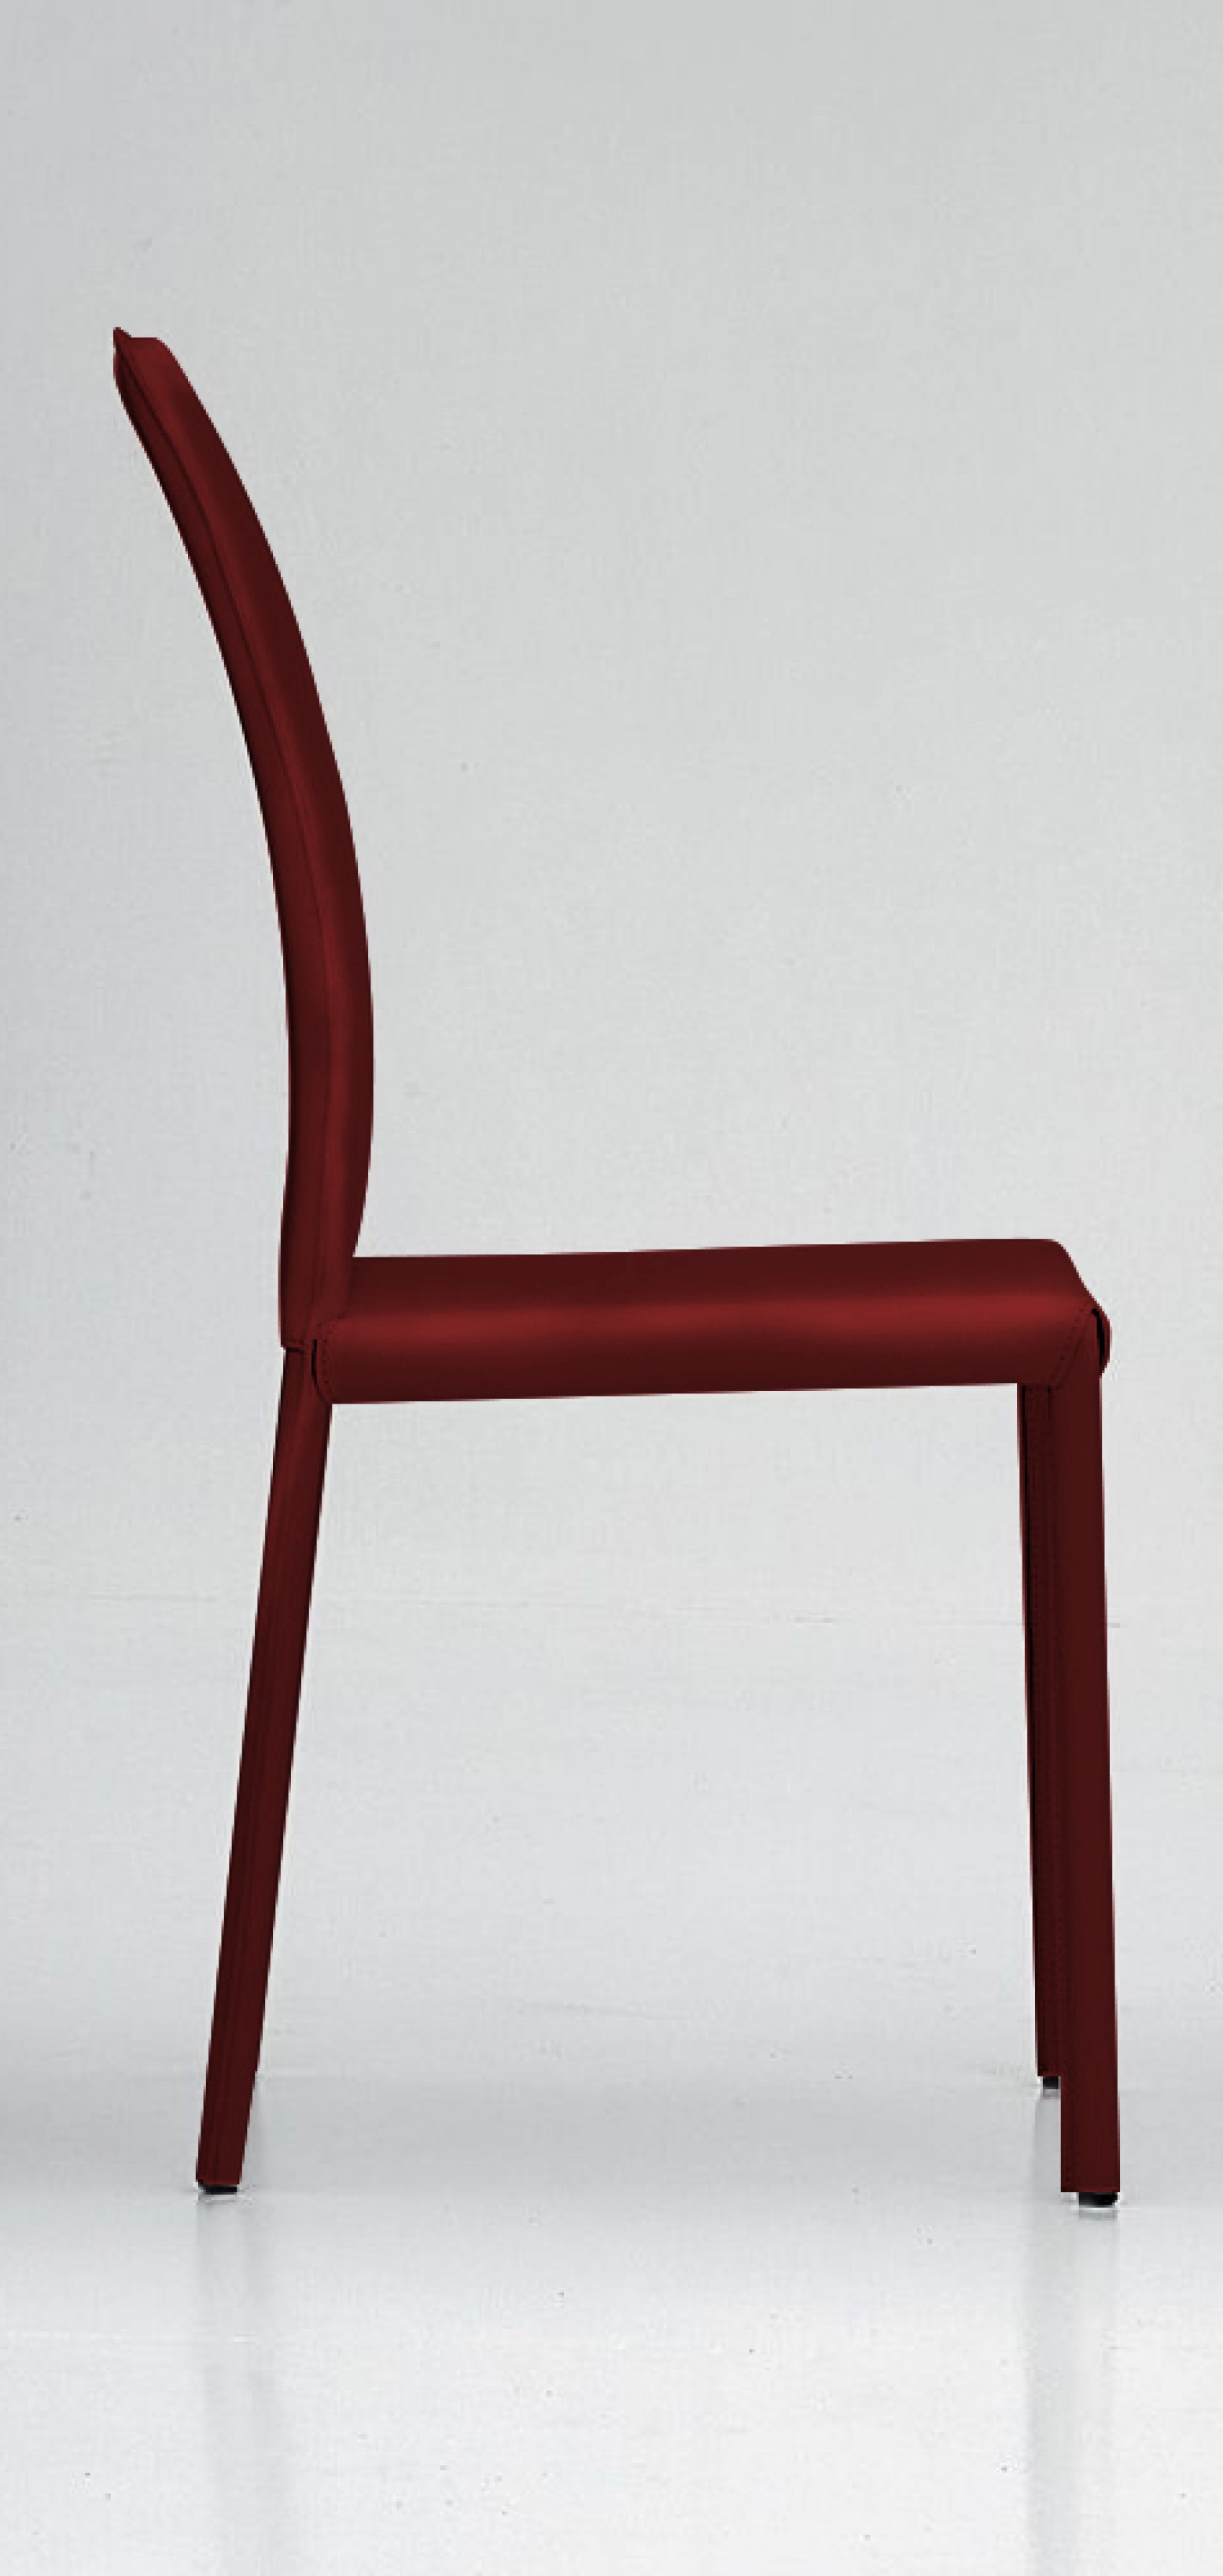 Madeleine Standard Dining Chair Burgundy Red Thick Leather Buy Online At Best Price